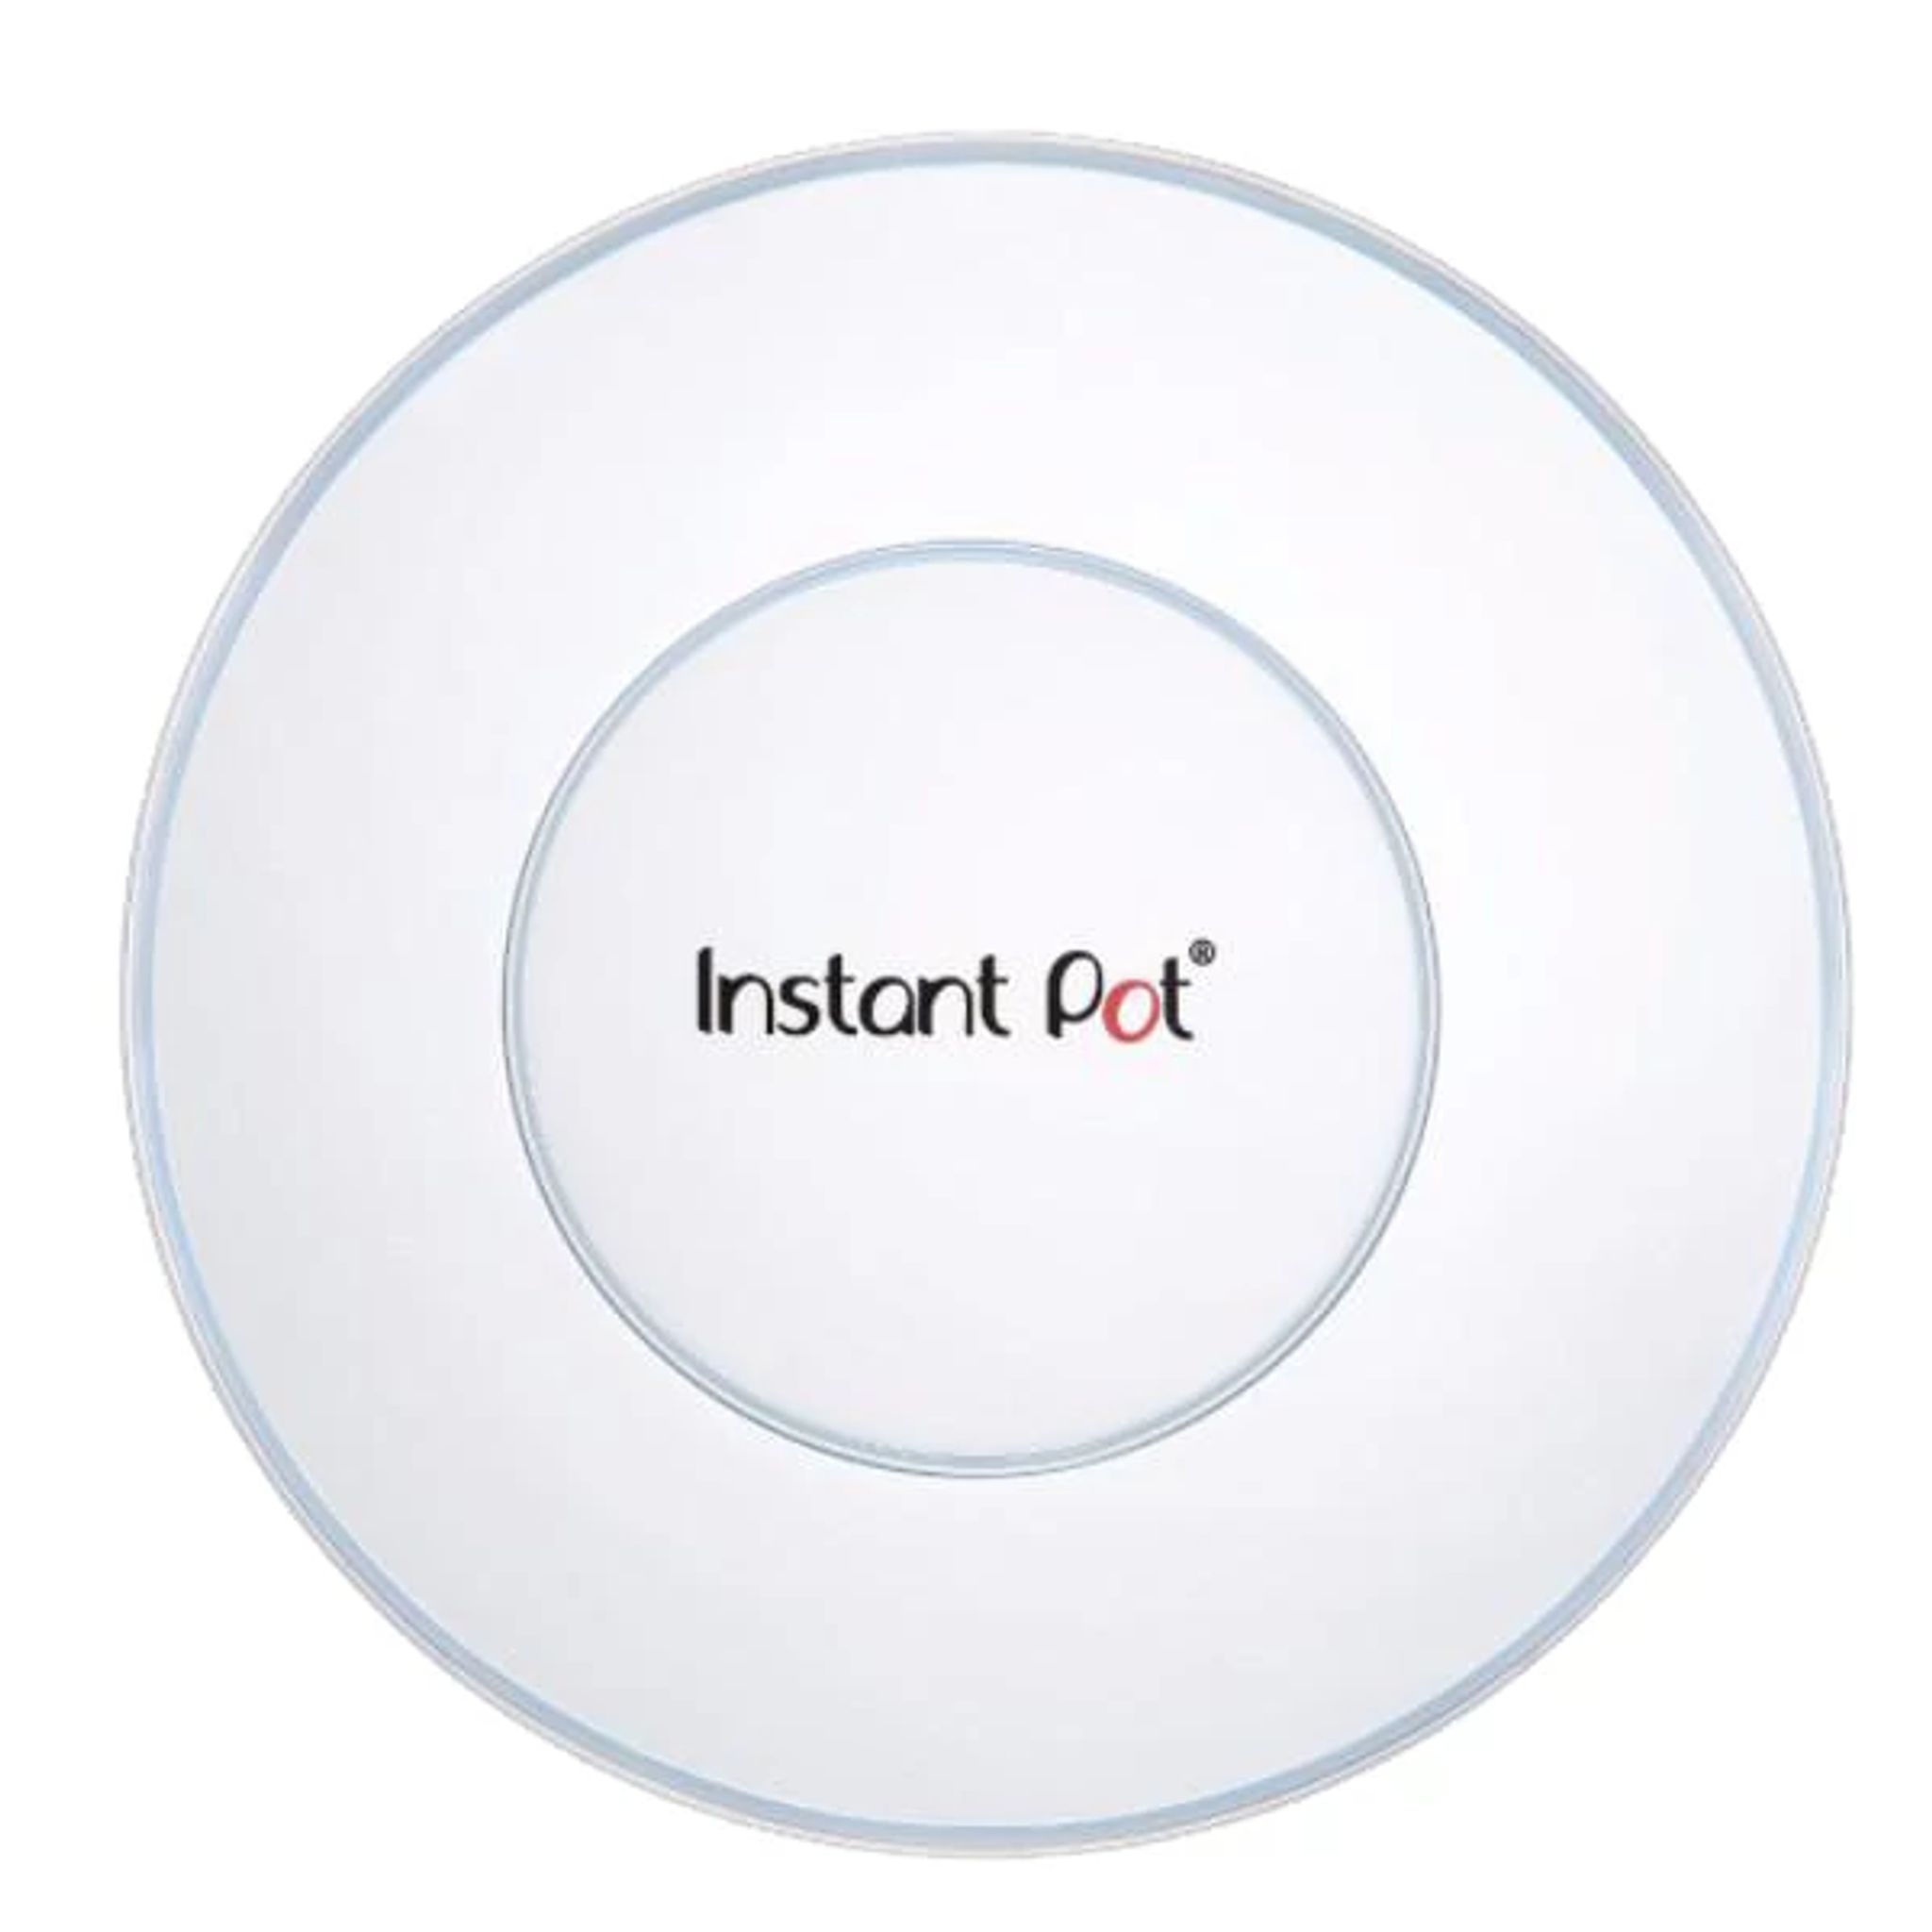 9 inch Tempered Glass Lid for Instant Pot 6 Quart, Silicone Lid Silicone  Cover for Instant Pot 6 Quart, Silicone Sealing Rings for Instant Pot 5 qt  or